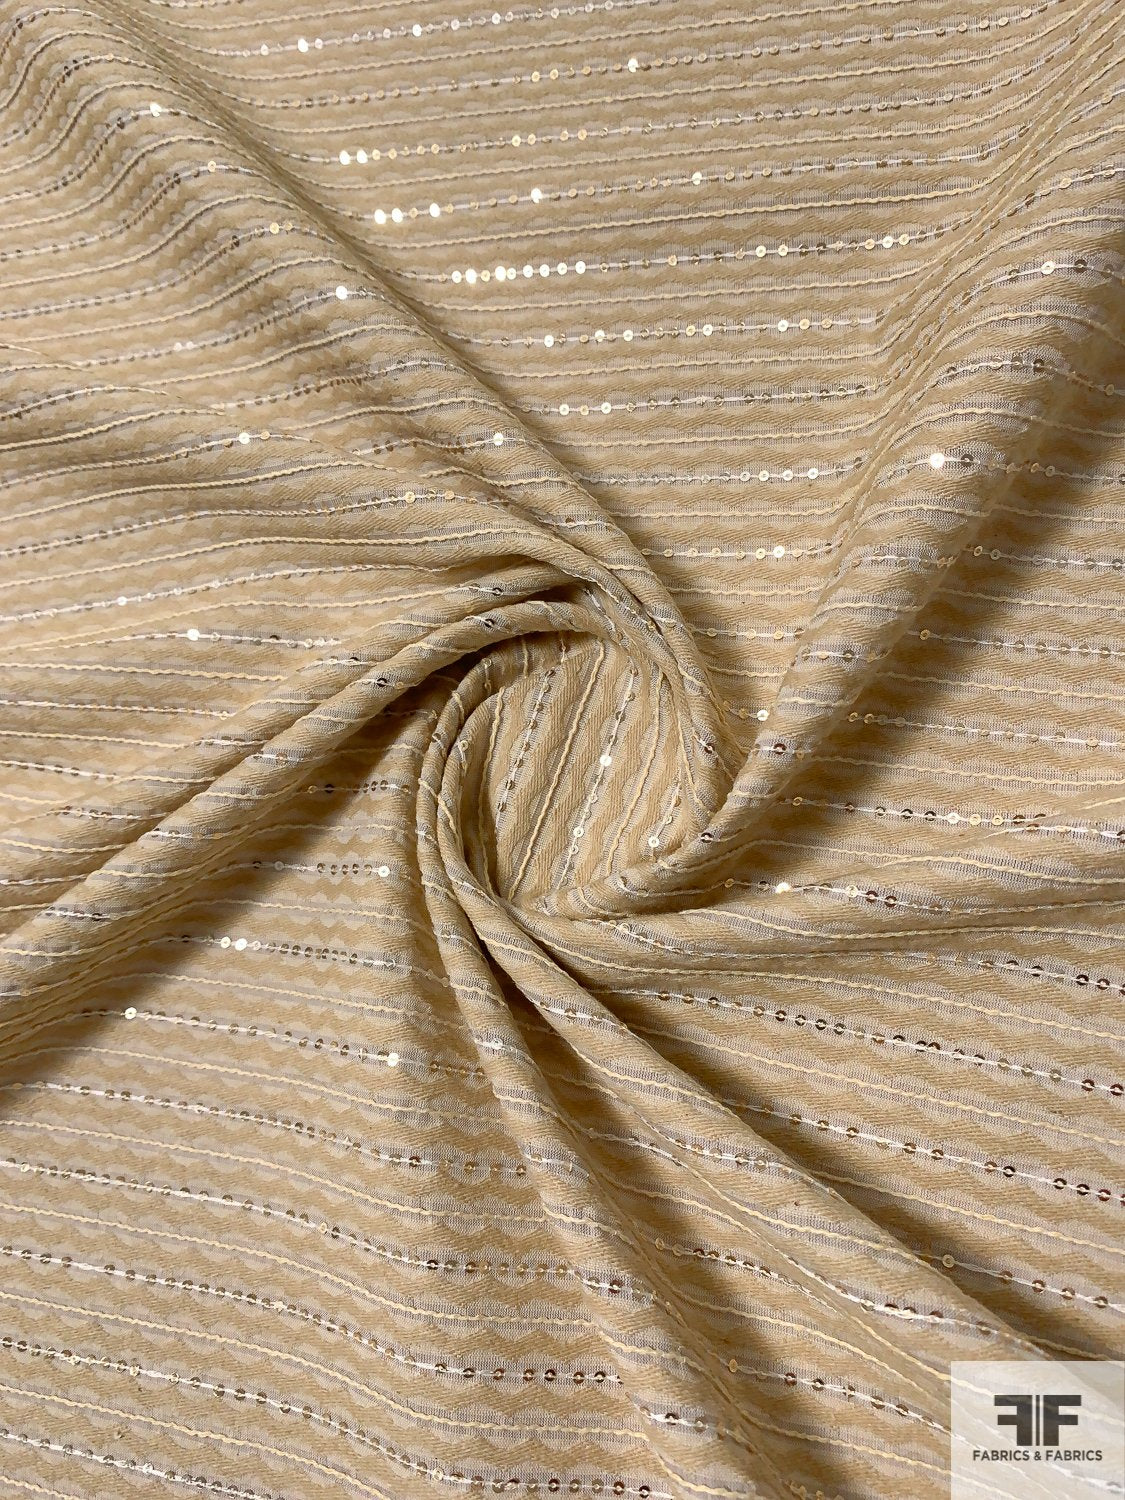 Italian Wavy Striped Novelty Cotton Suiting with Small Fine Sequins - Beige / Sand